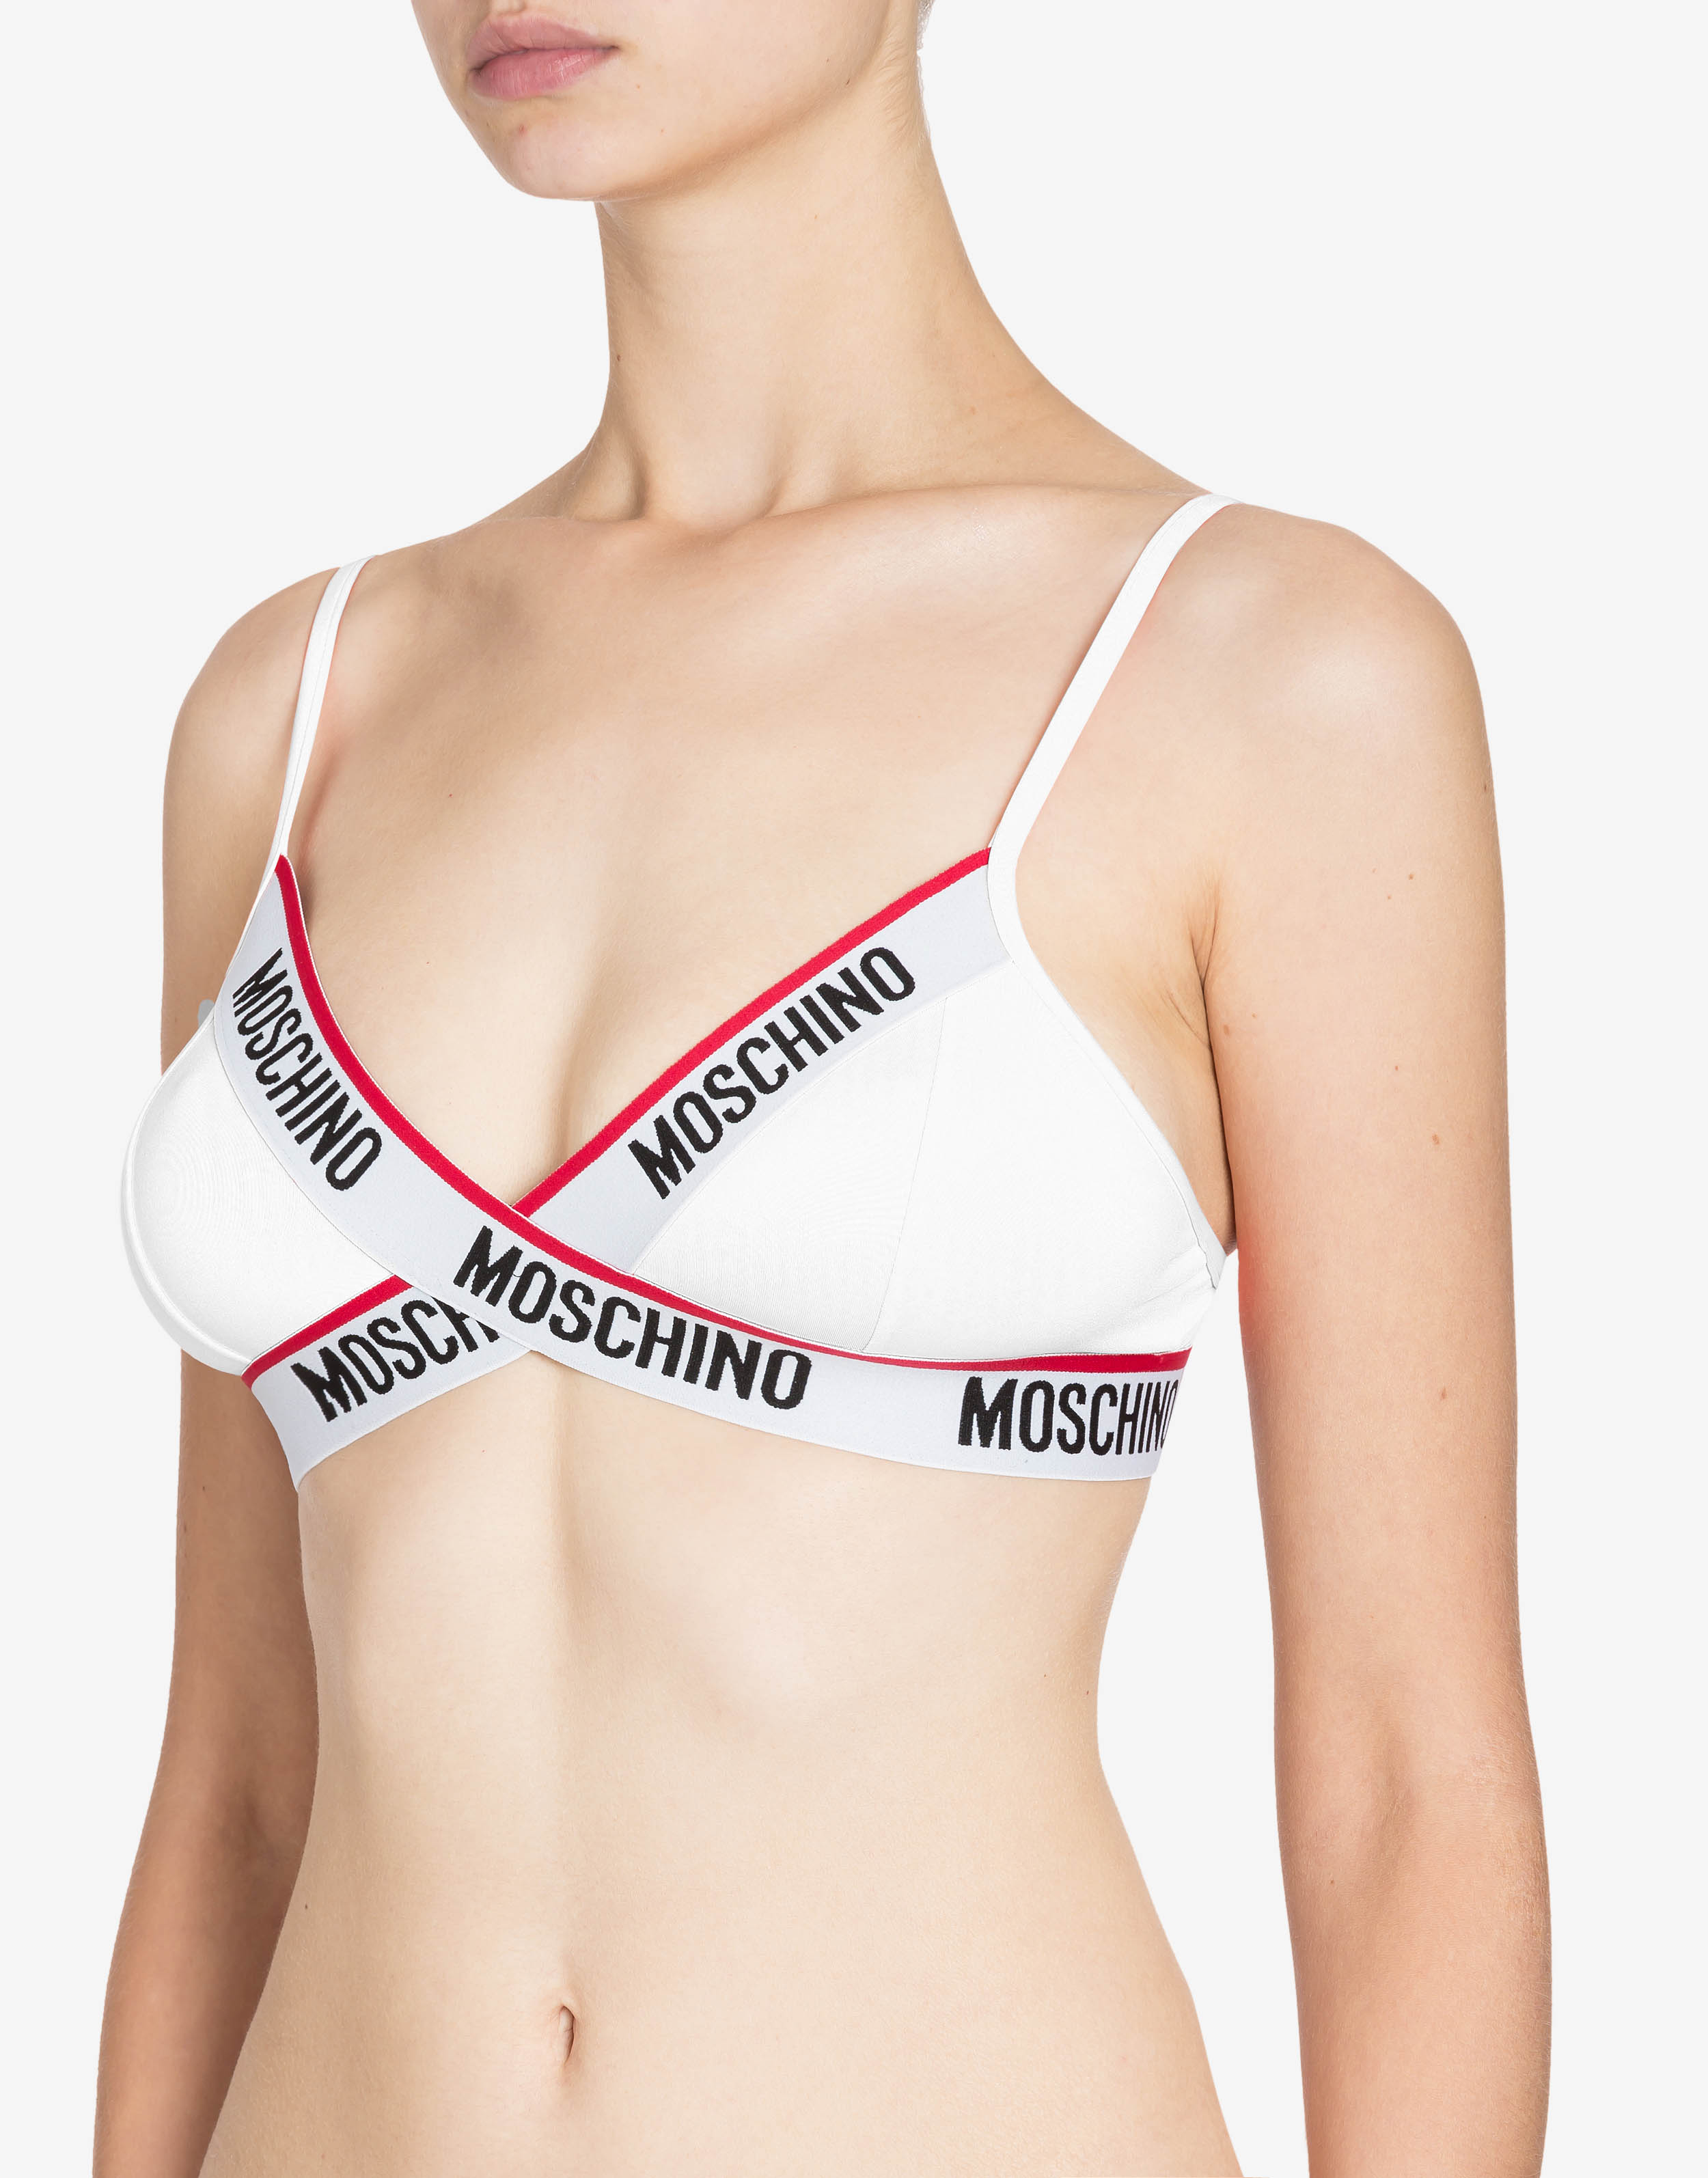 Moschino Underwear Lace Bustier and Panties